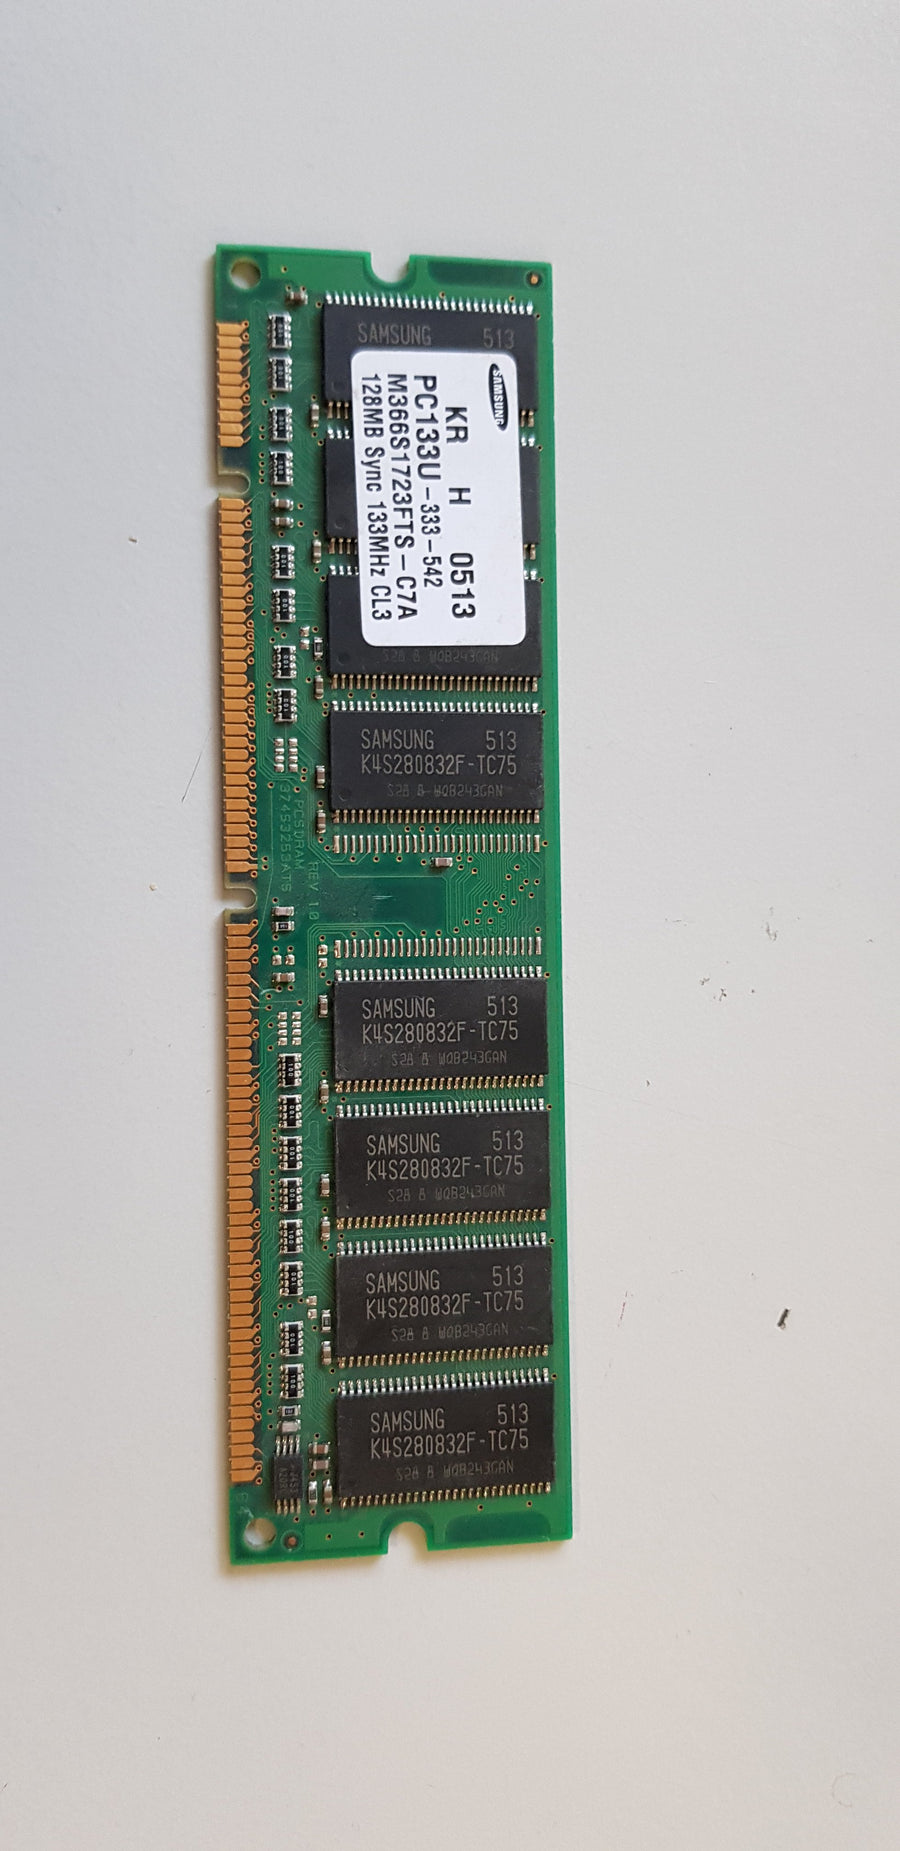 Samsung 128MB PC133 133MHz non-ECC Unbuffered CL3 168-Pin DIMM ( M366S1723FTS-C7A ) USED